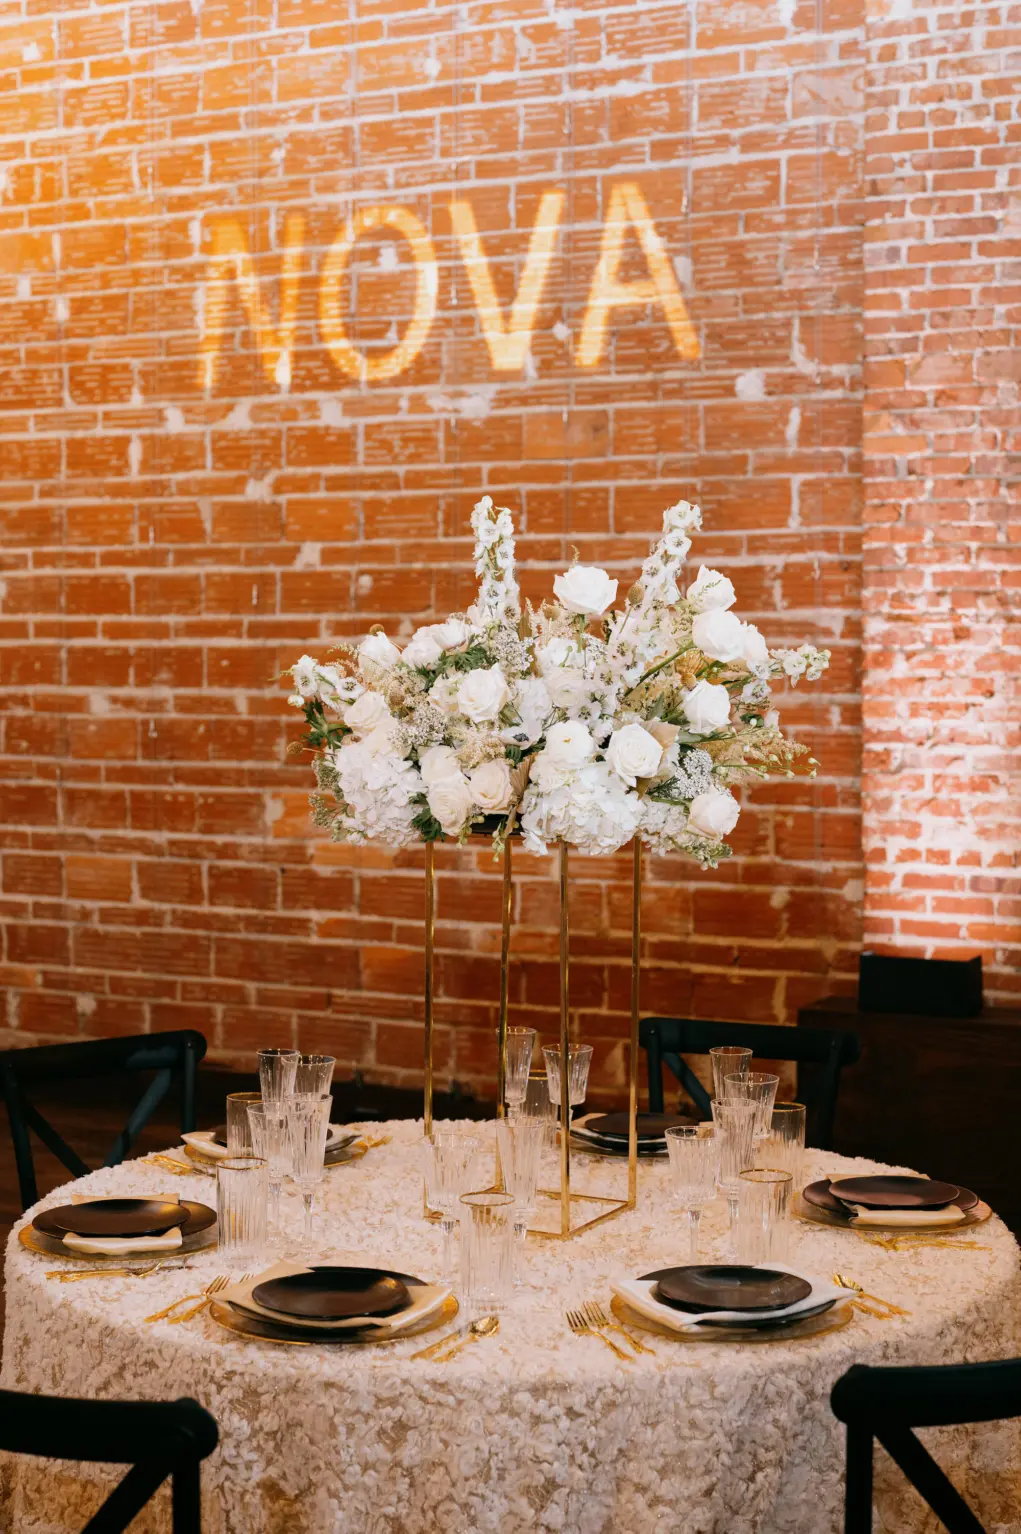 Tall Gold Flower Stand Centerpiece Inspiration with White Roses, Stock Flowers, and Hydrangeas | Black and Gold Table Setting Ideas for Modern Great Gatsby Themed Wedding Reception Ideas | Black Chairs | St Pete Kate Ryan Event Rentals | Florist Marigold Flower Co